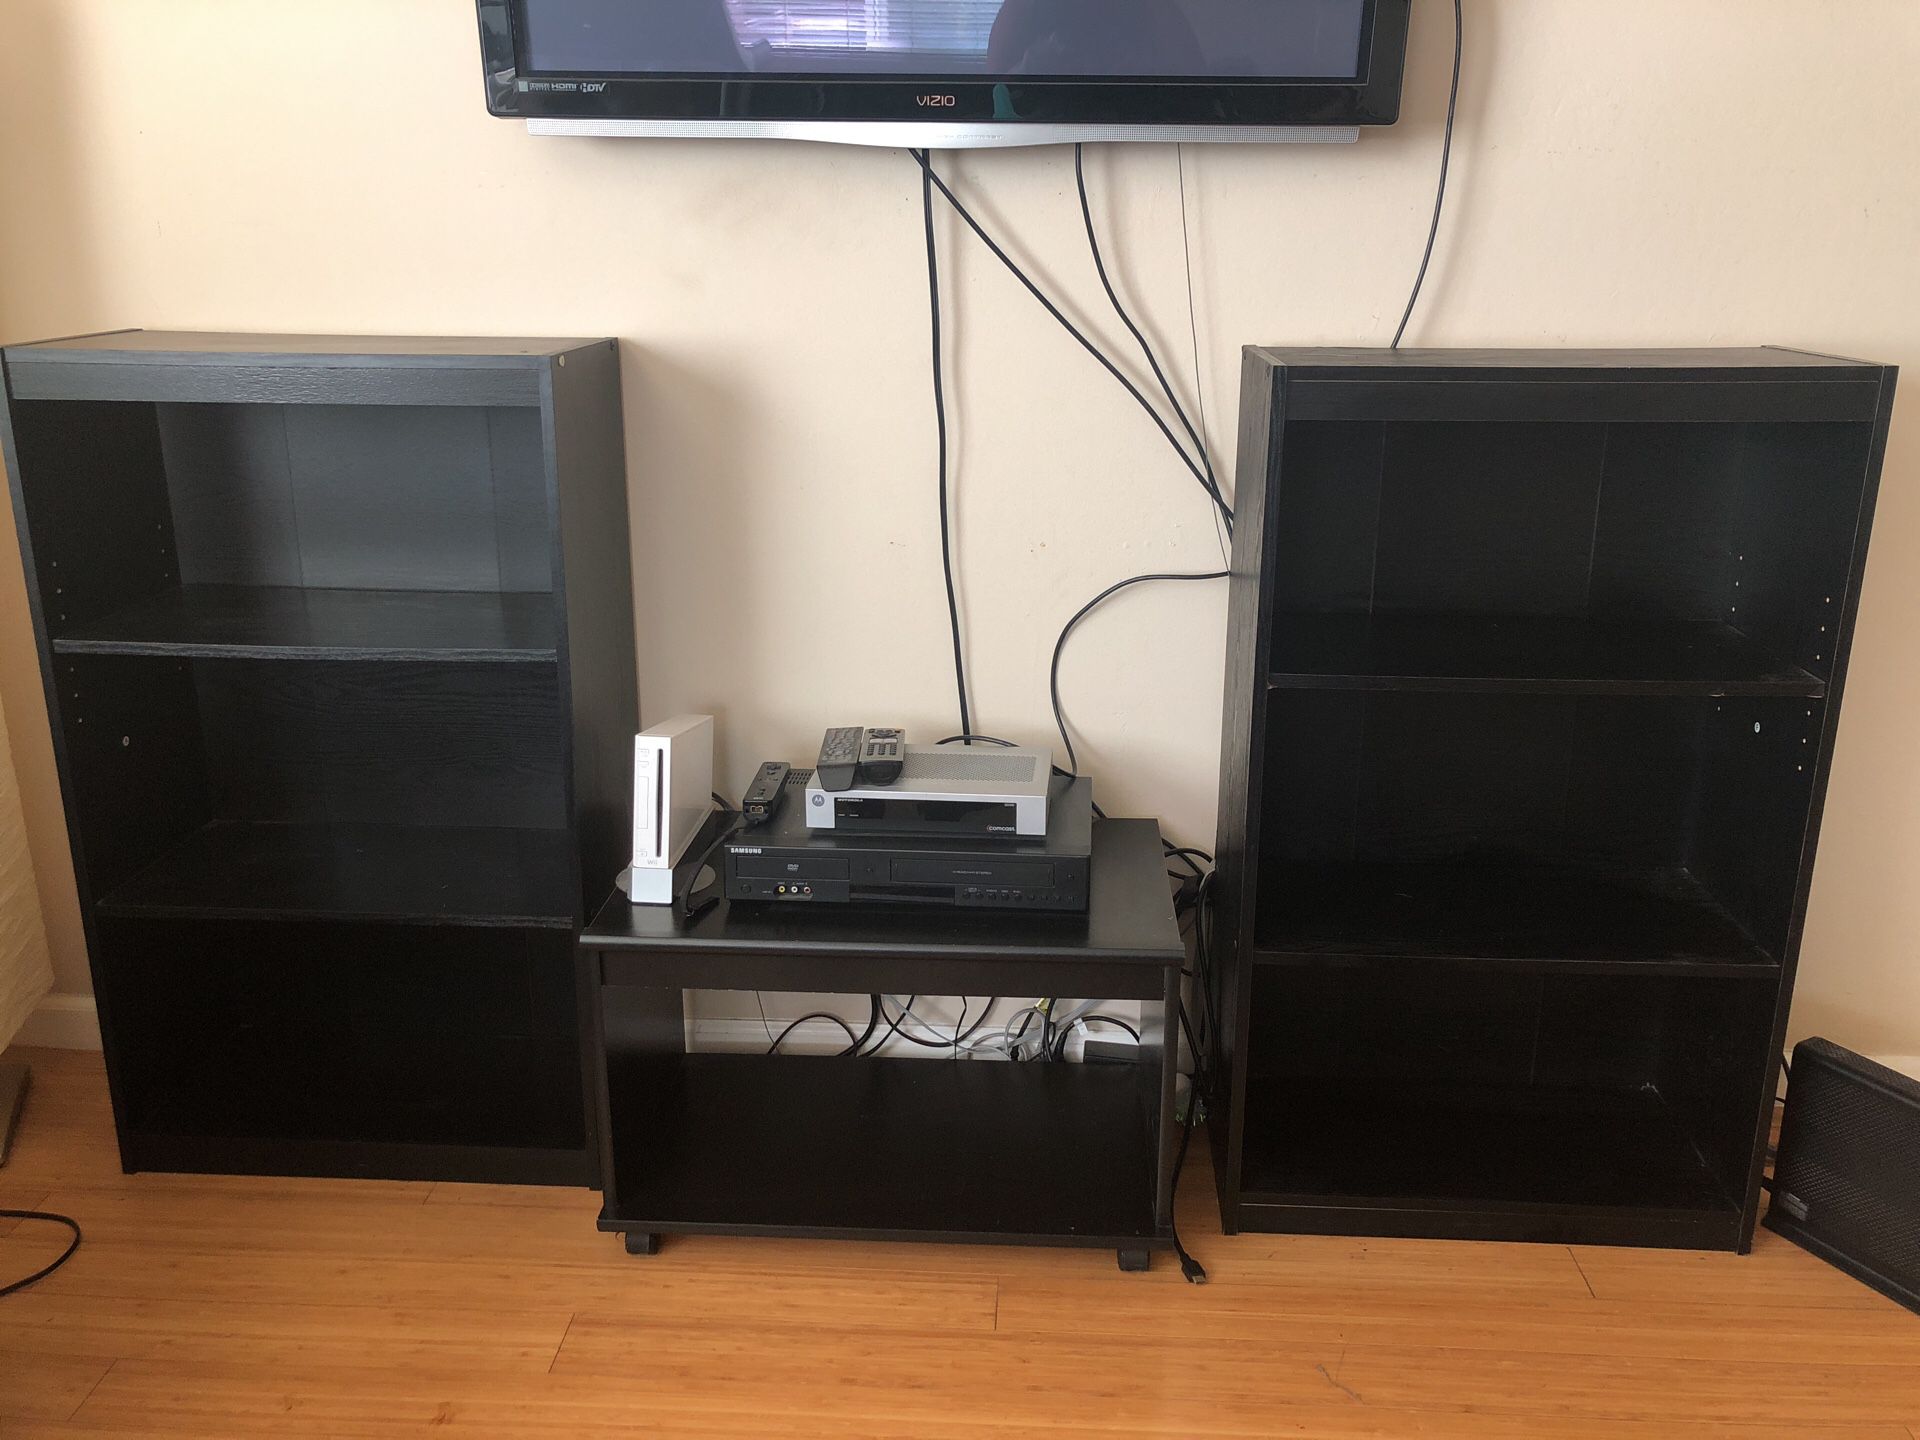 Two bookshelves with an entertainment box stand